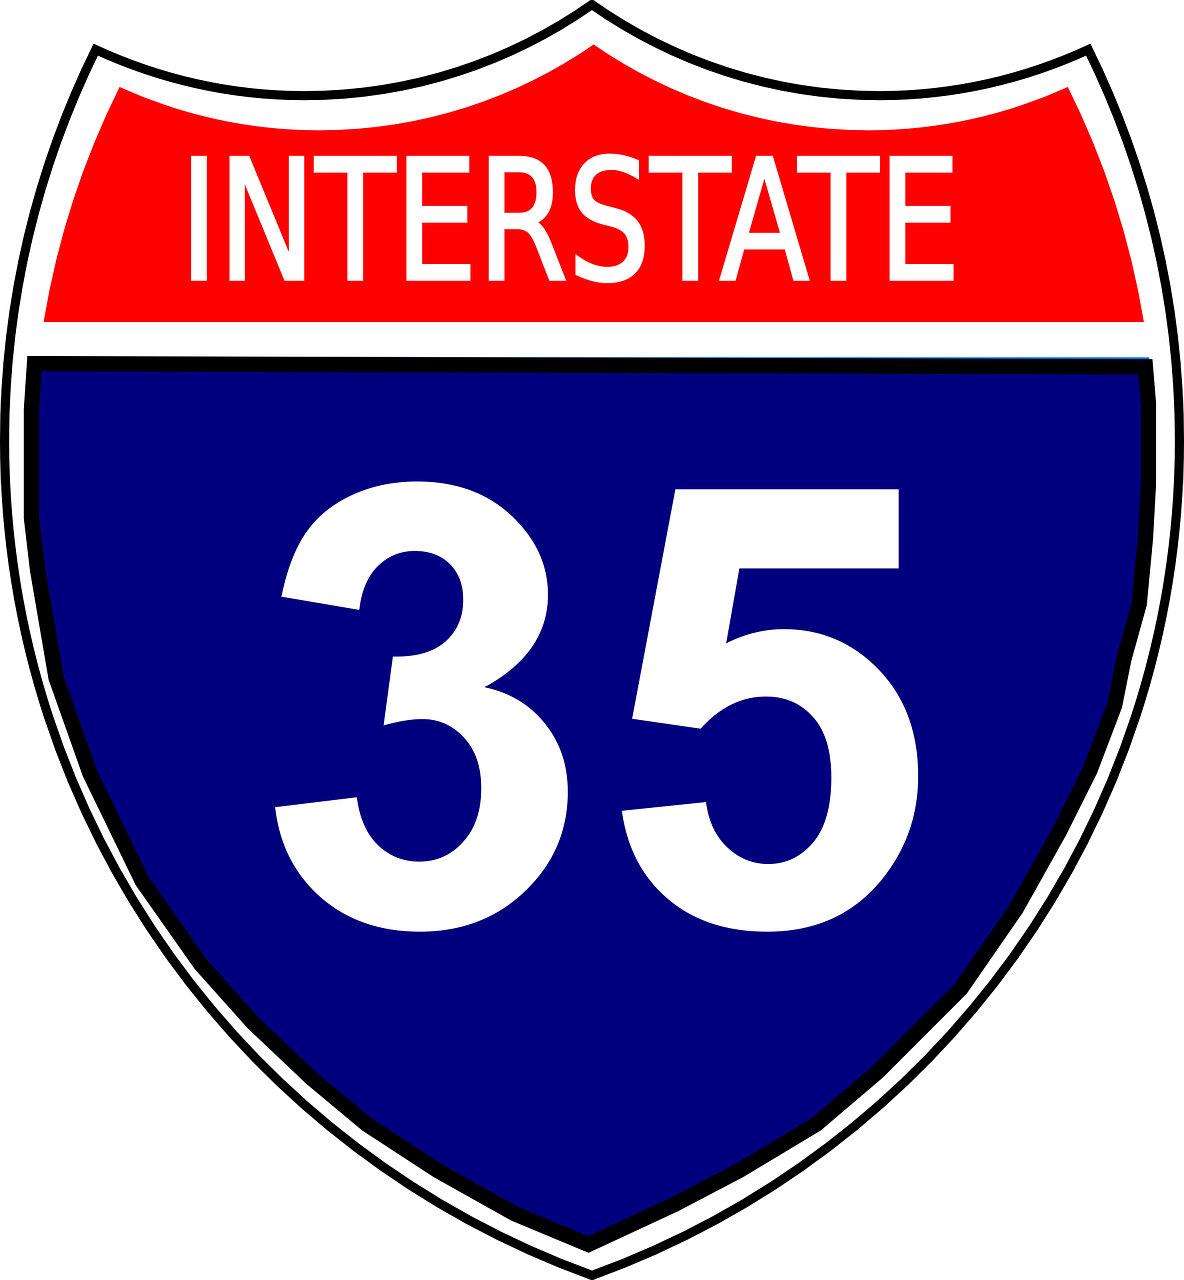 a interstate sign with the number 35 on it, an illustration of, by Jeffrey Smith, pixabay, !! very coherent!!, 3 2 x 3 2, 45 years old men, computer